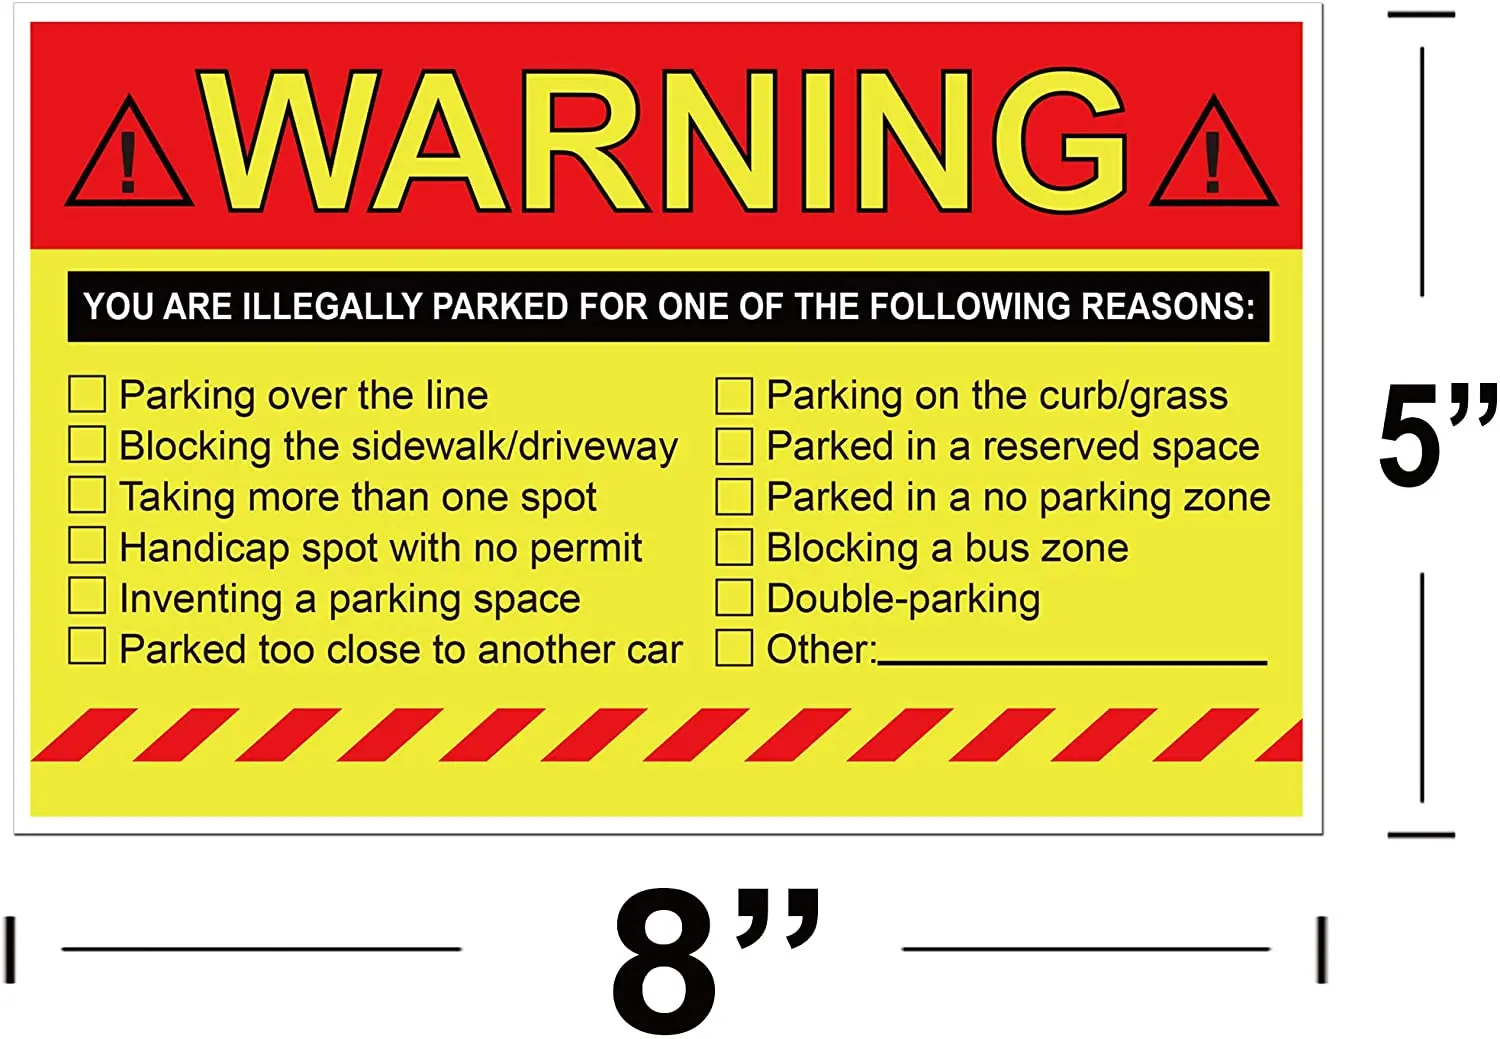 50 Pcs Decor No Parking Warning Stickers Car Window You Are Illegally Parked Parking Violation Tow Away Stickers For Vehicles